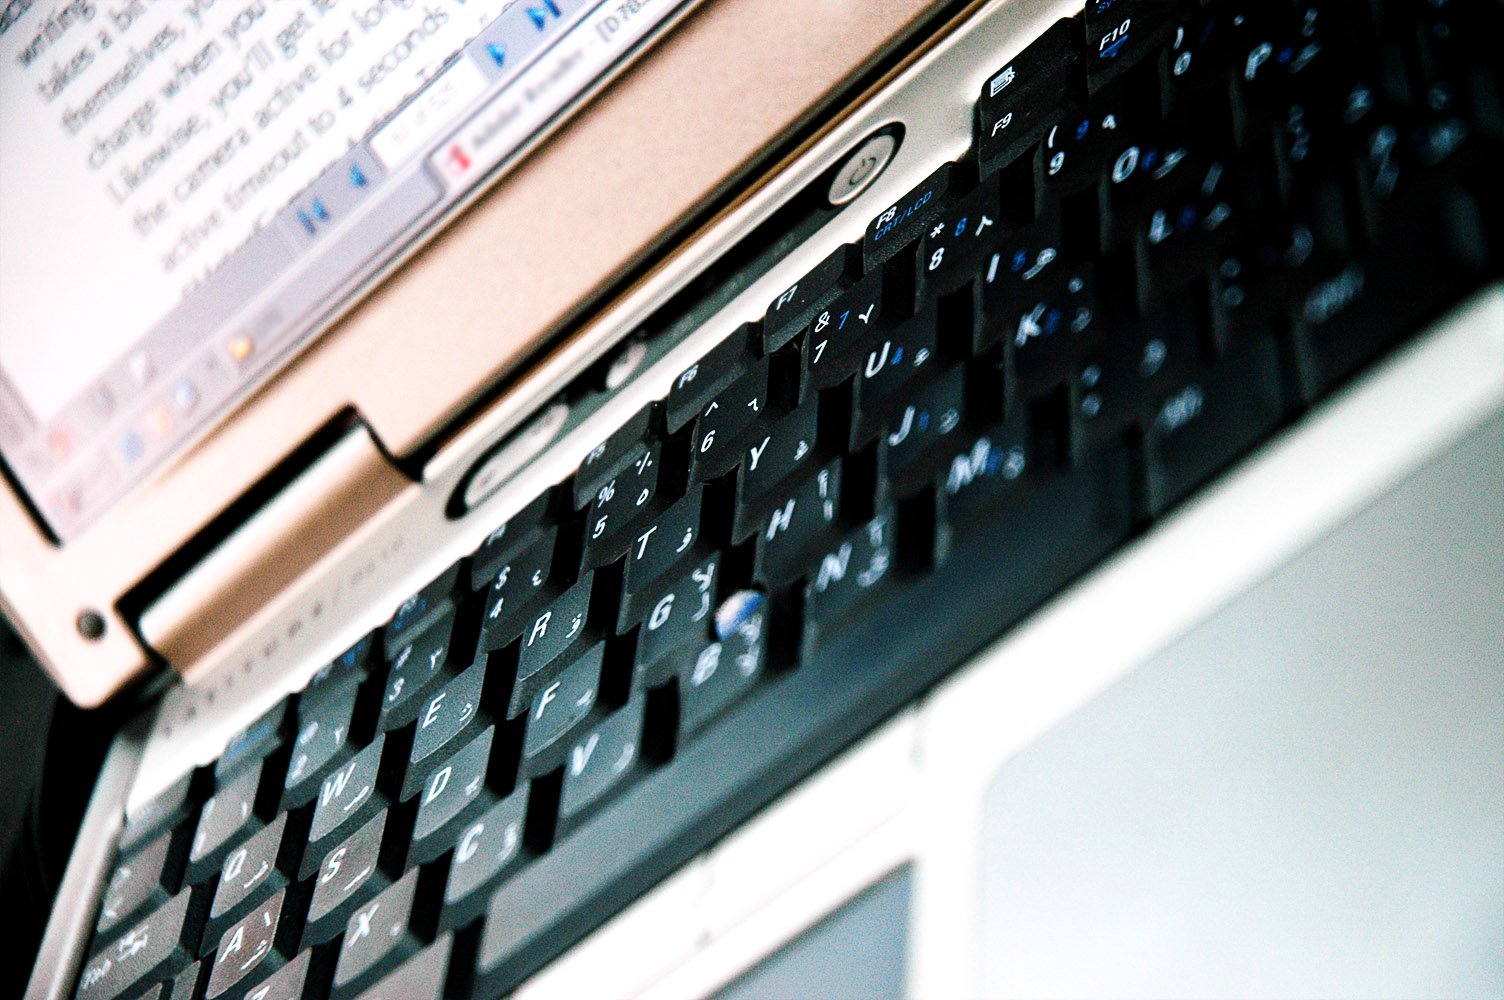 a close up po of the keyboard and its external key board